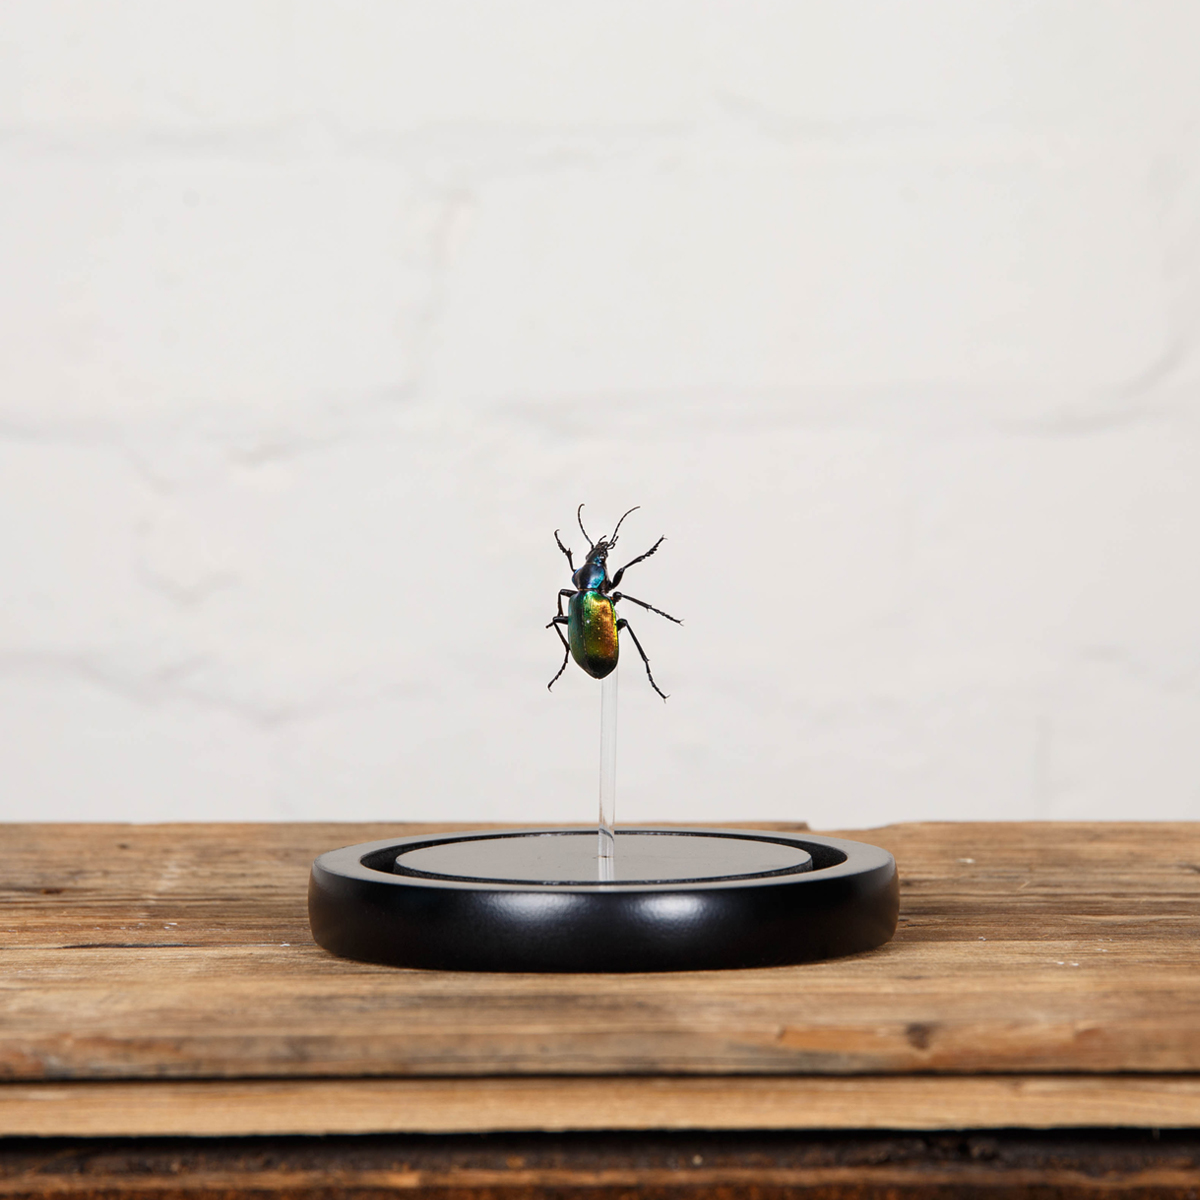 Forest Caterpillar Hunter in Glass Dome with Wooden Base (Calosoma sycophanta)